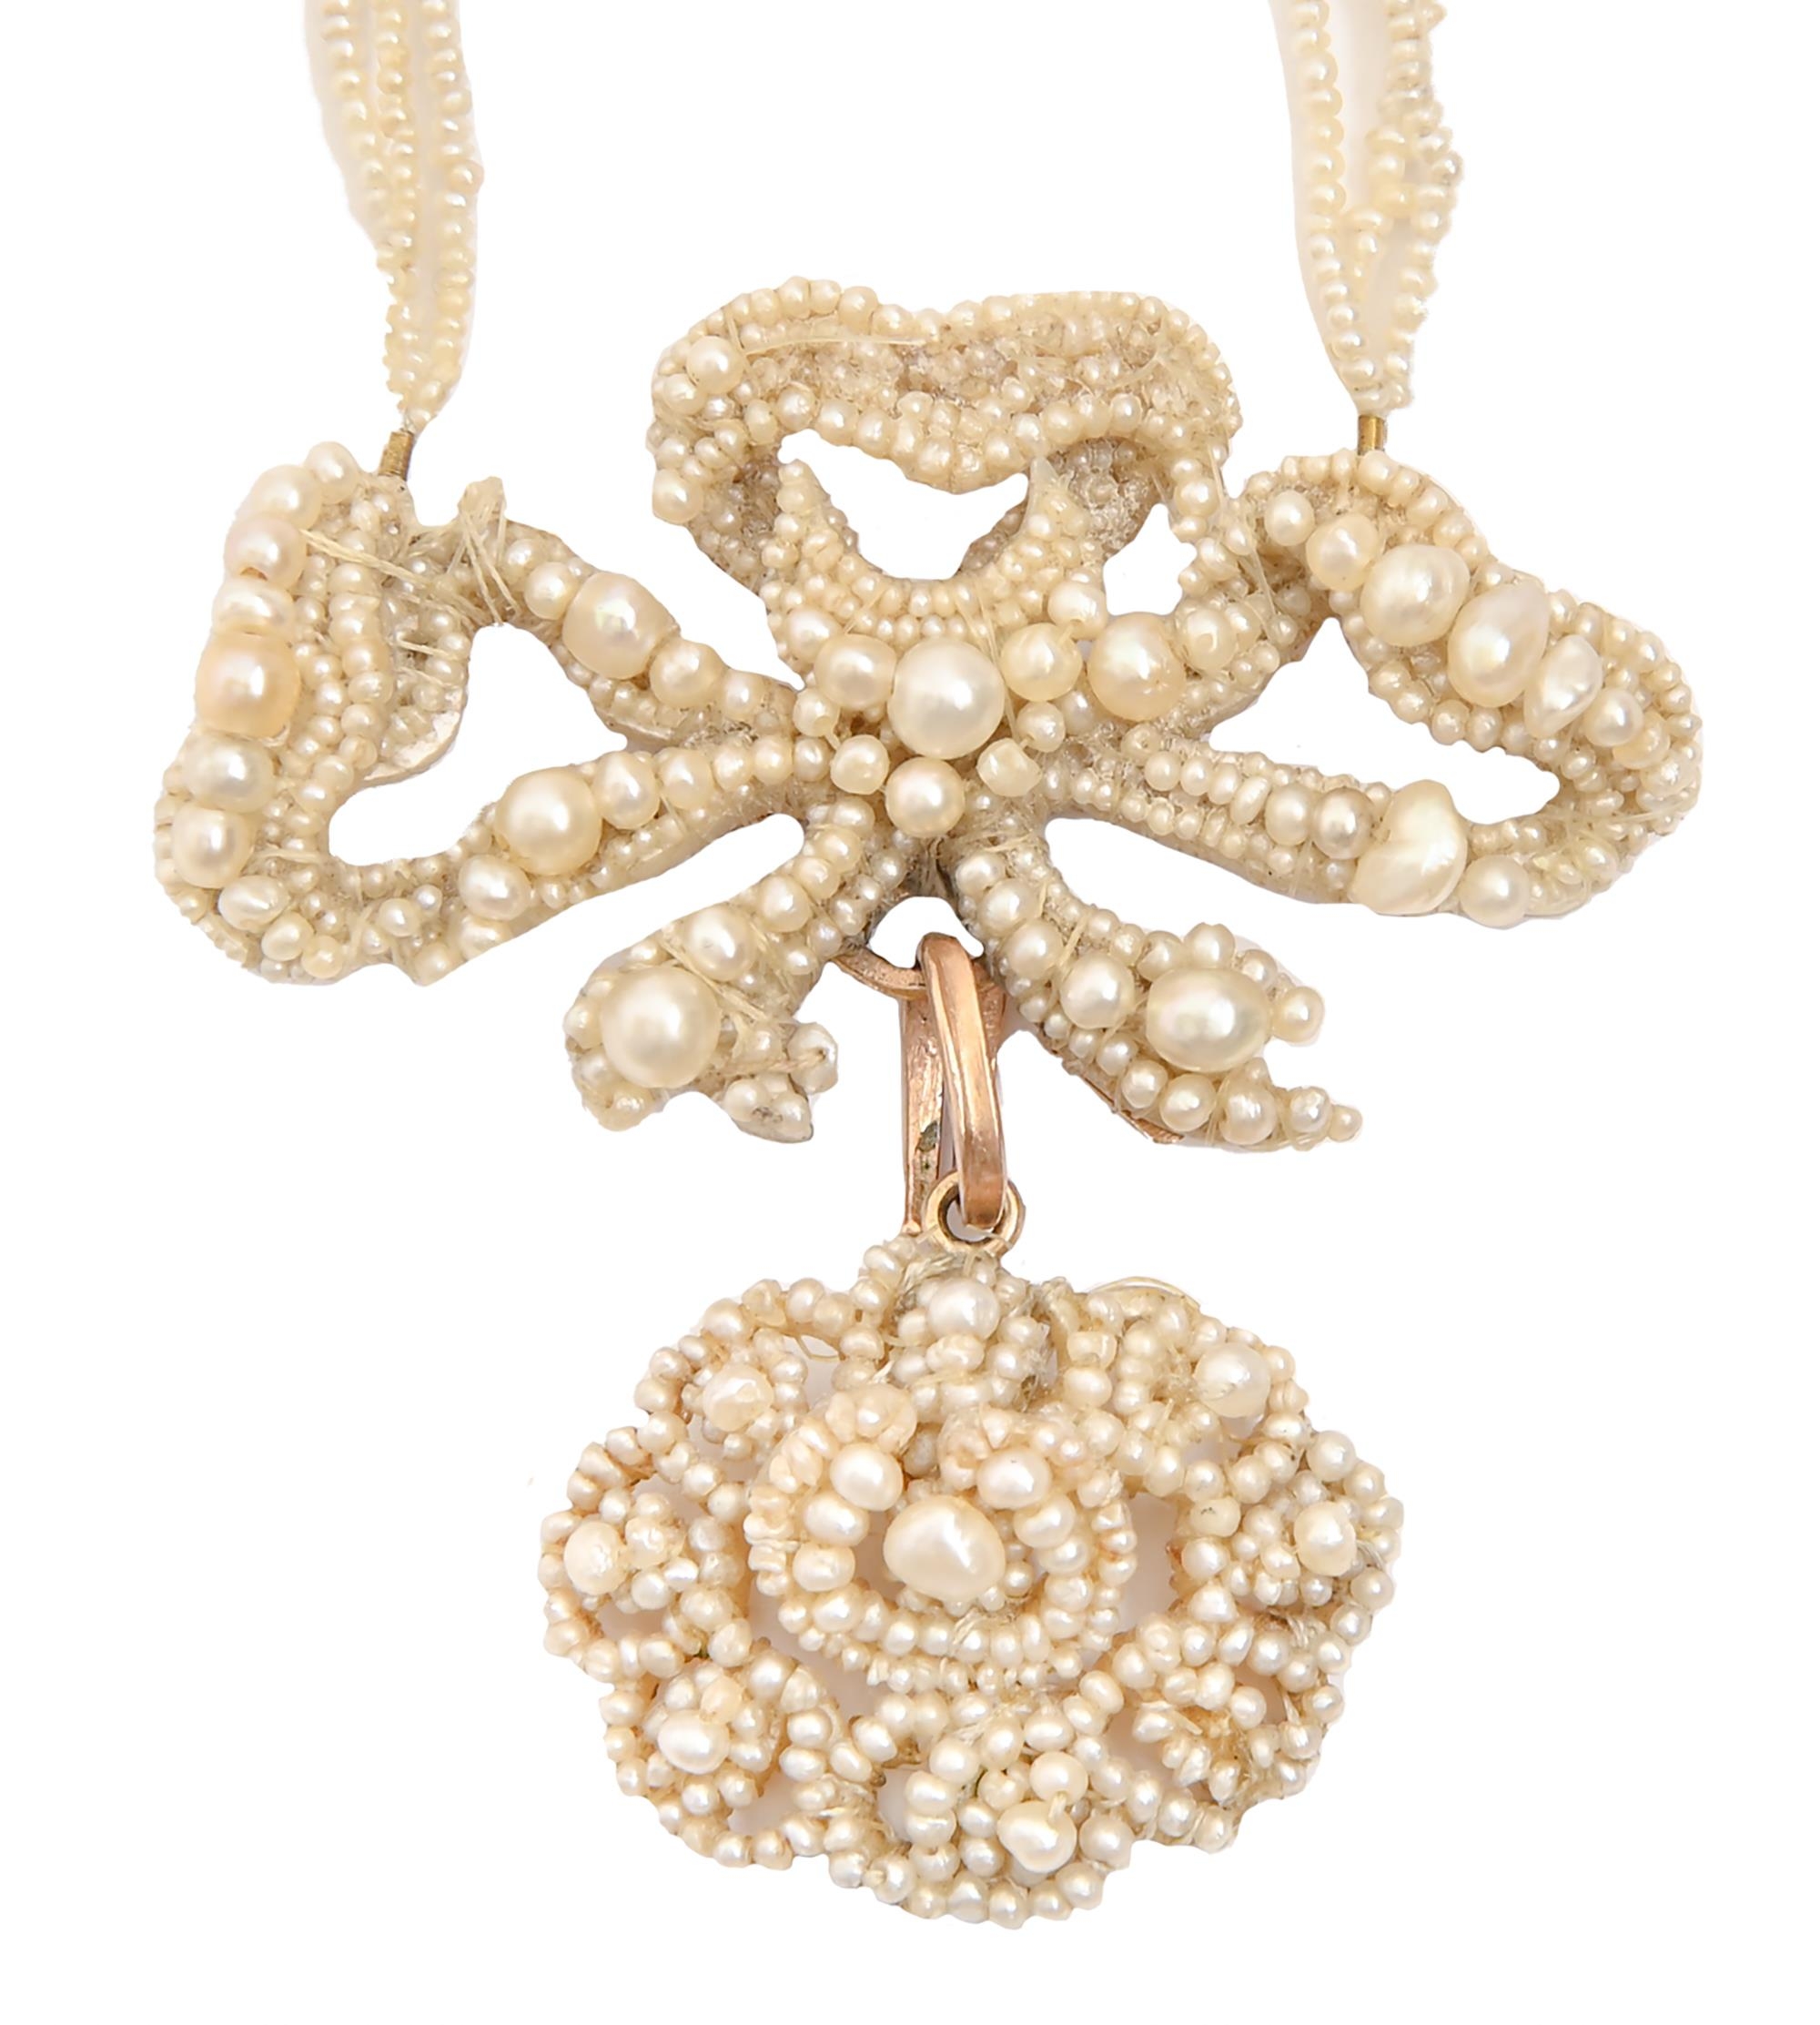 A seed pearl necklace, c1830, in the form of a bow and floral pendant, on gold wire armature